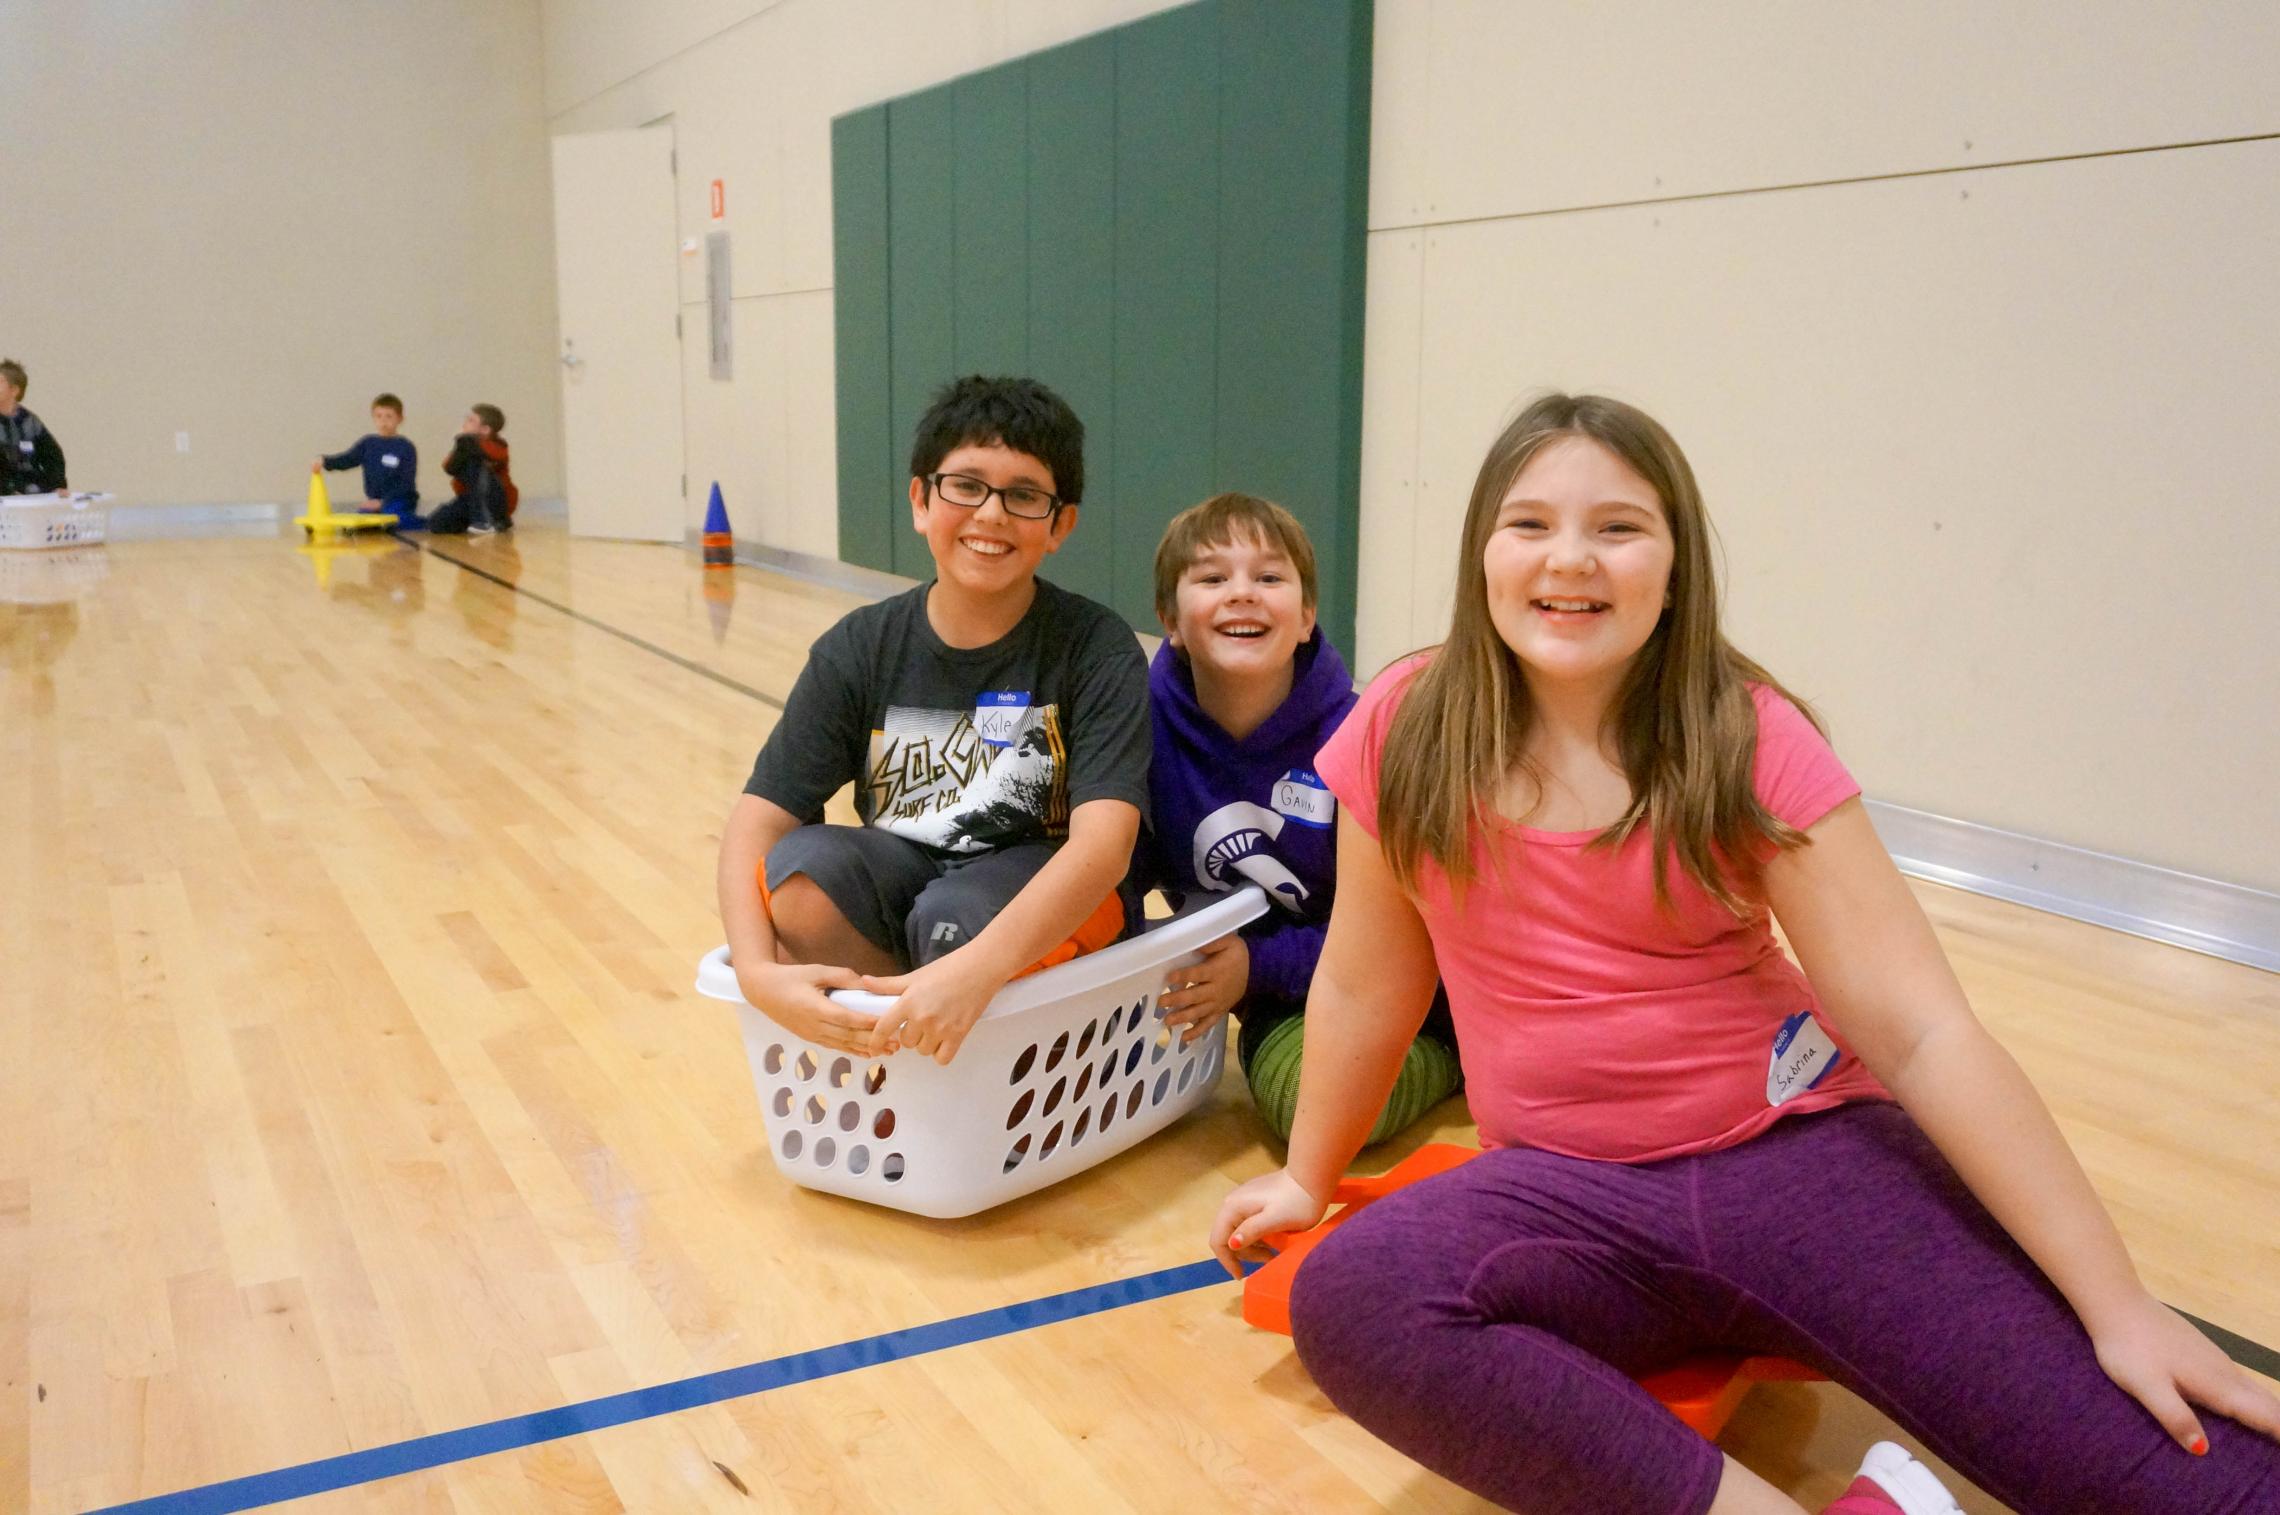 Camp participants playing gym game in a laundry basket